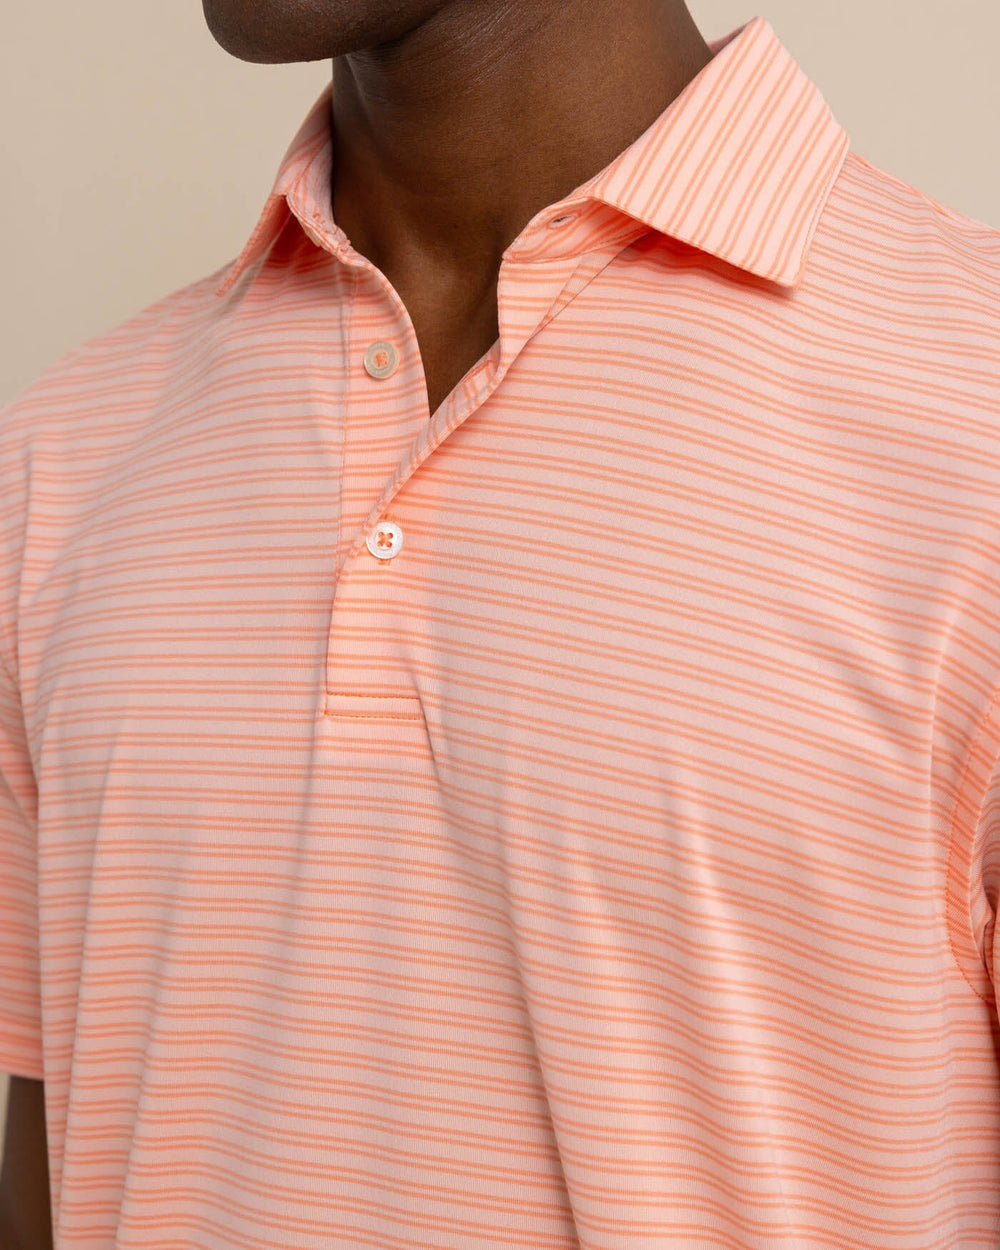 The detail view of the Southern Tide brrr eeze Beattie Stripe Performance Polo by Southern Tide - Apricot Blush Coral